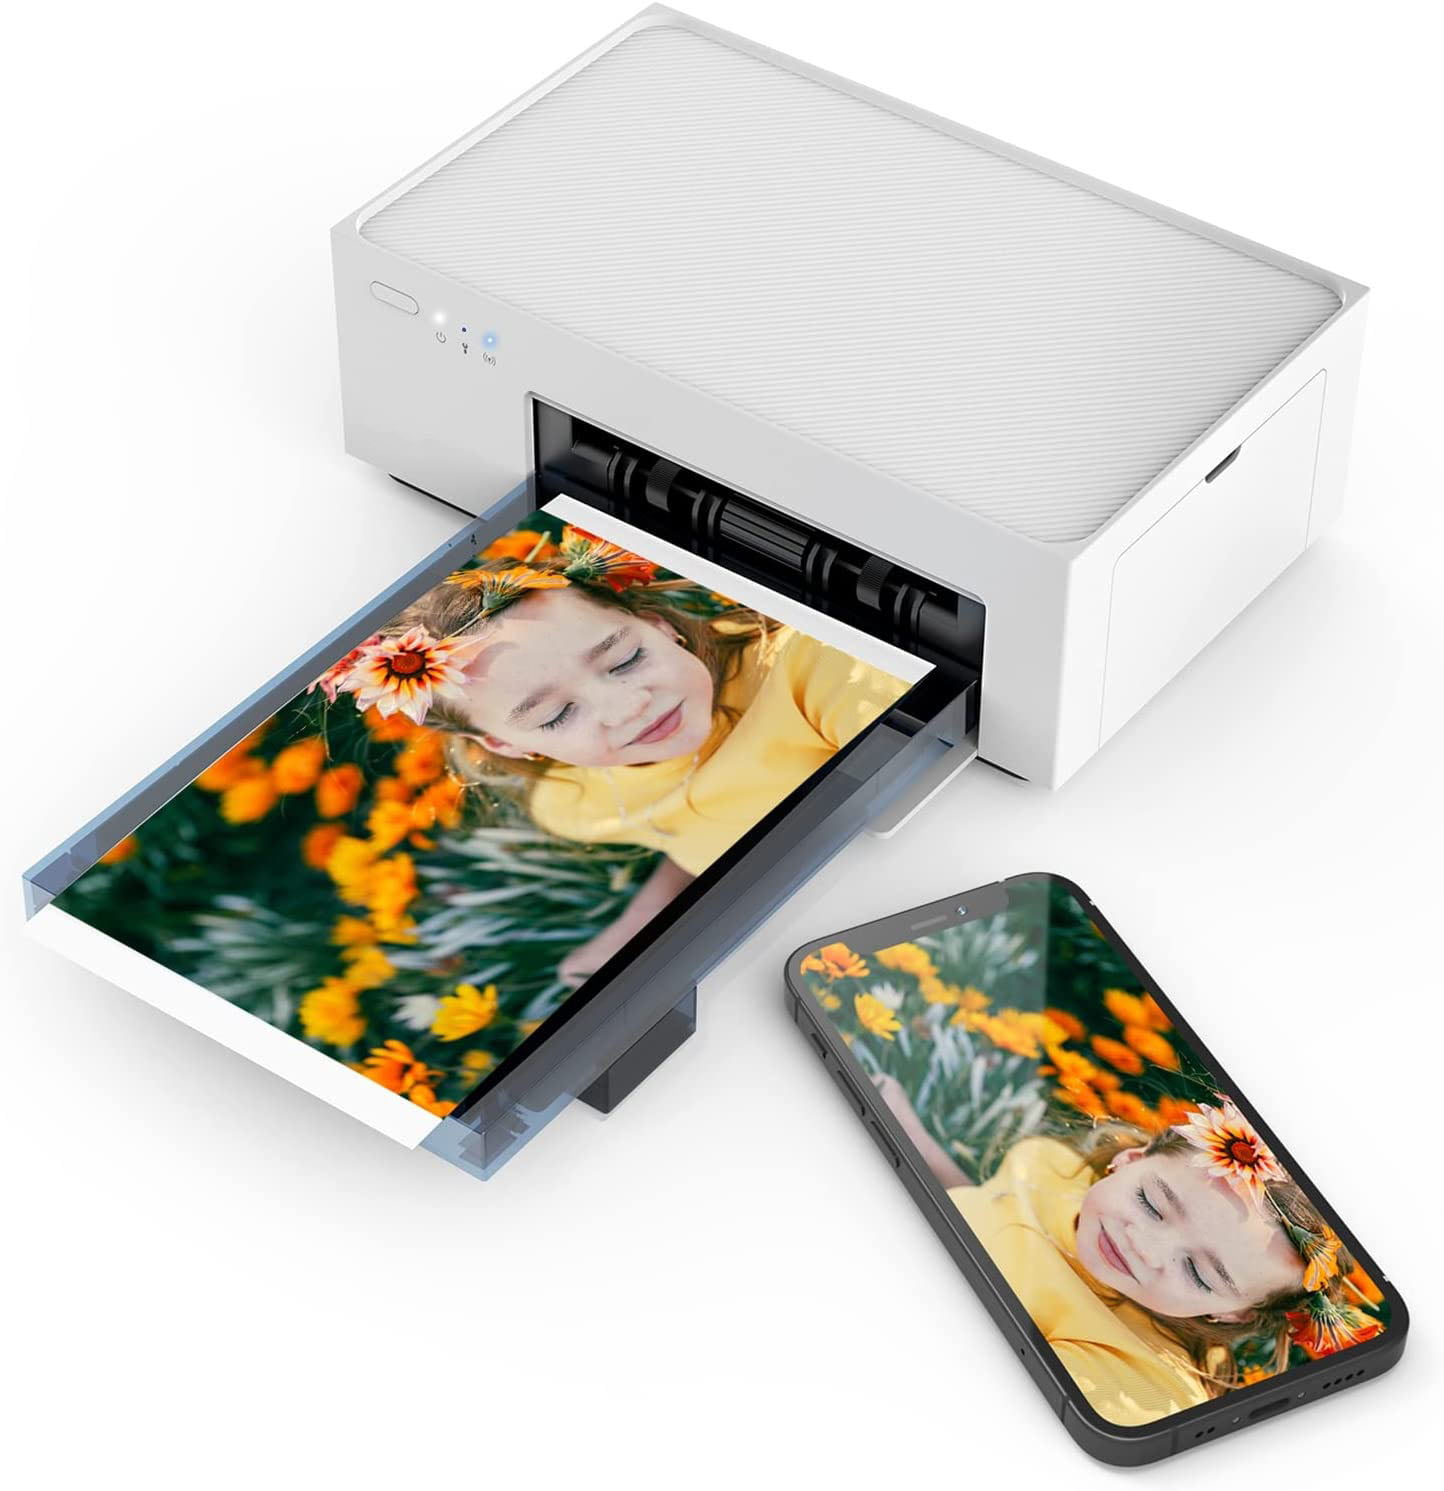 Brother VC-500W Versatile Compact Color Label and Photo Printer 